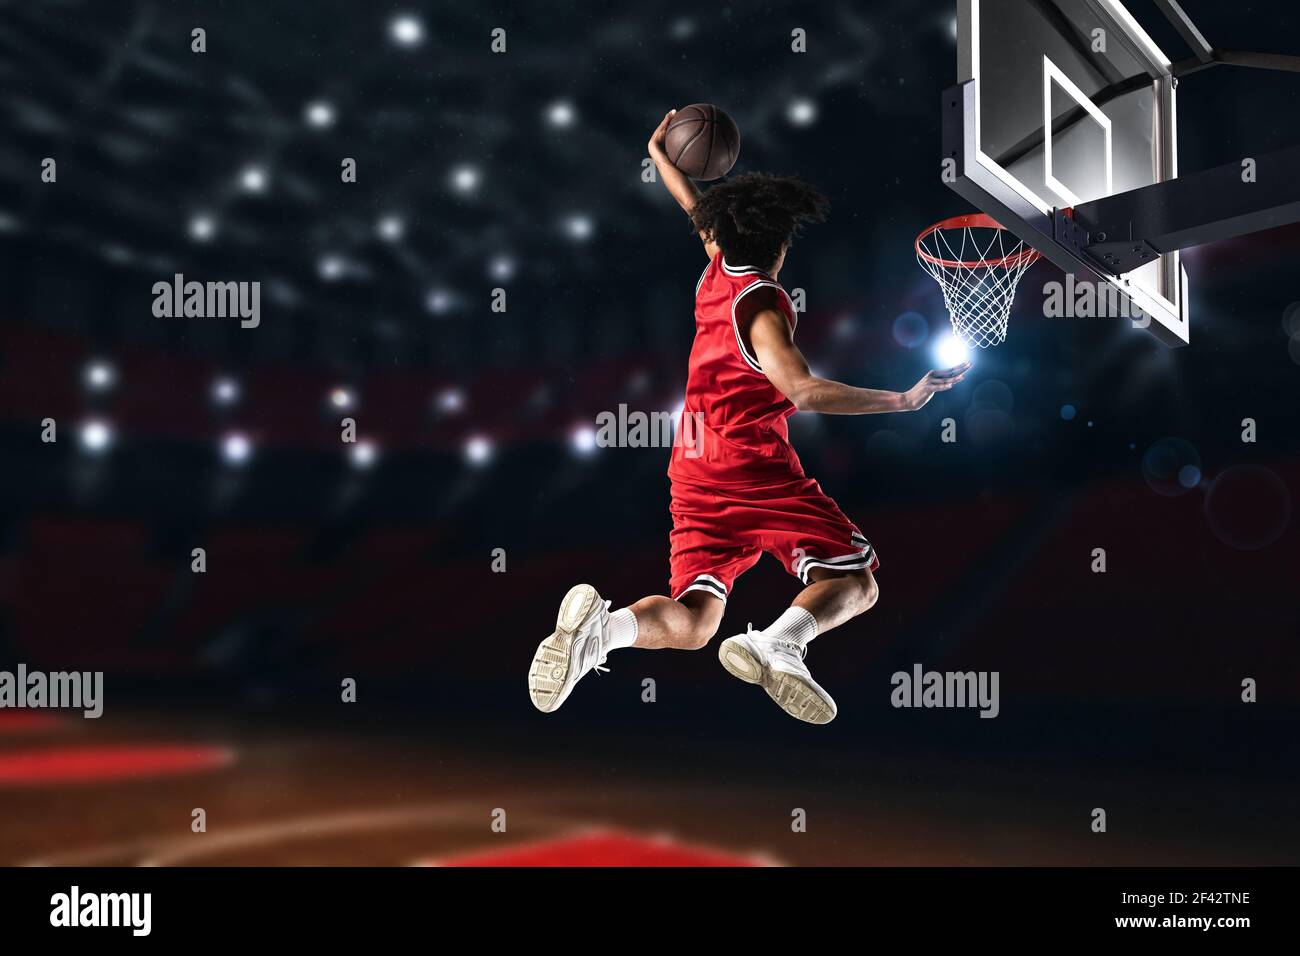 Basketball player in red uniform jumping high to make a slam dunk to the basket Stock Photo